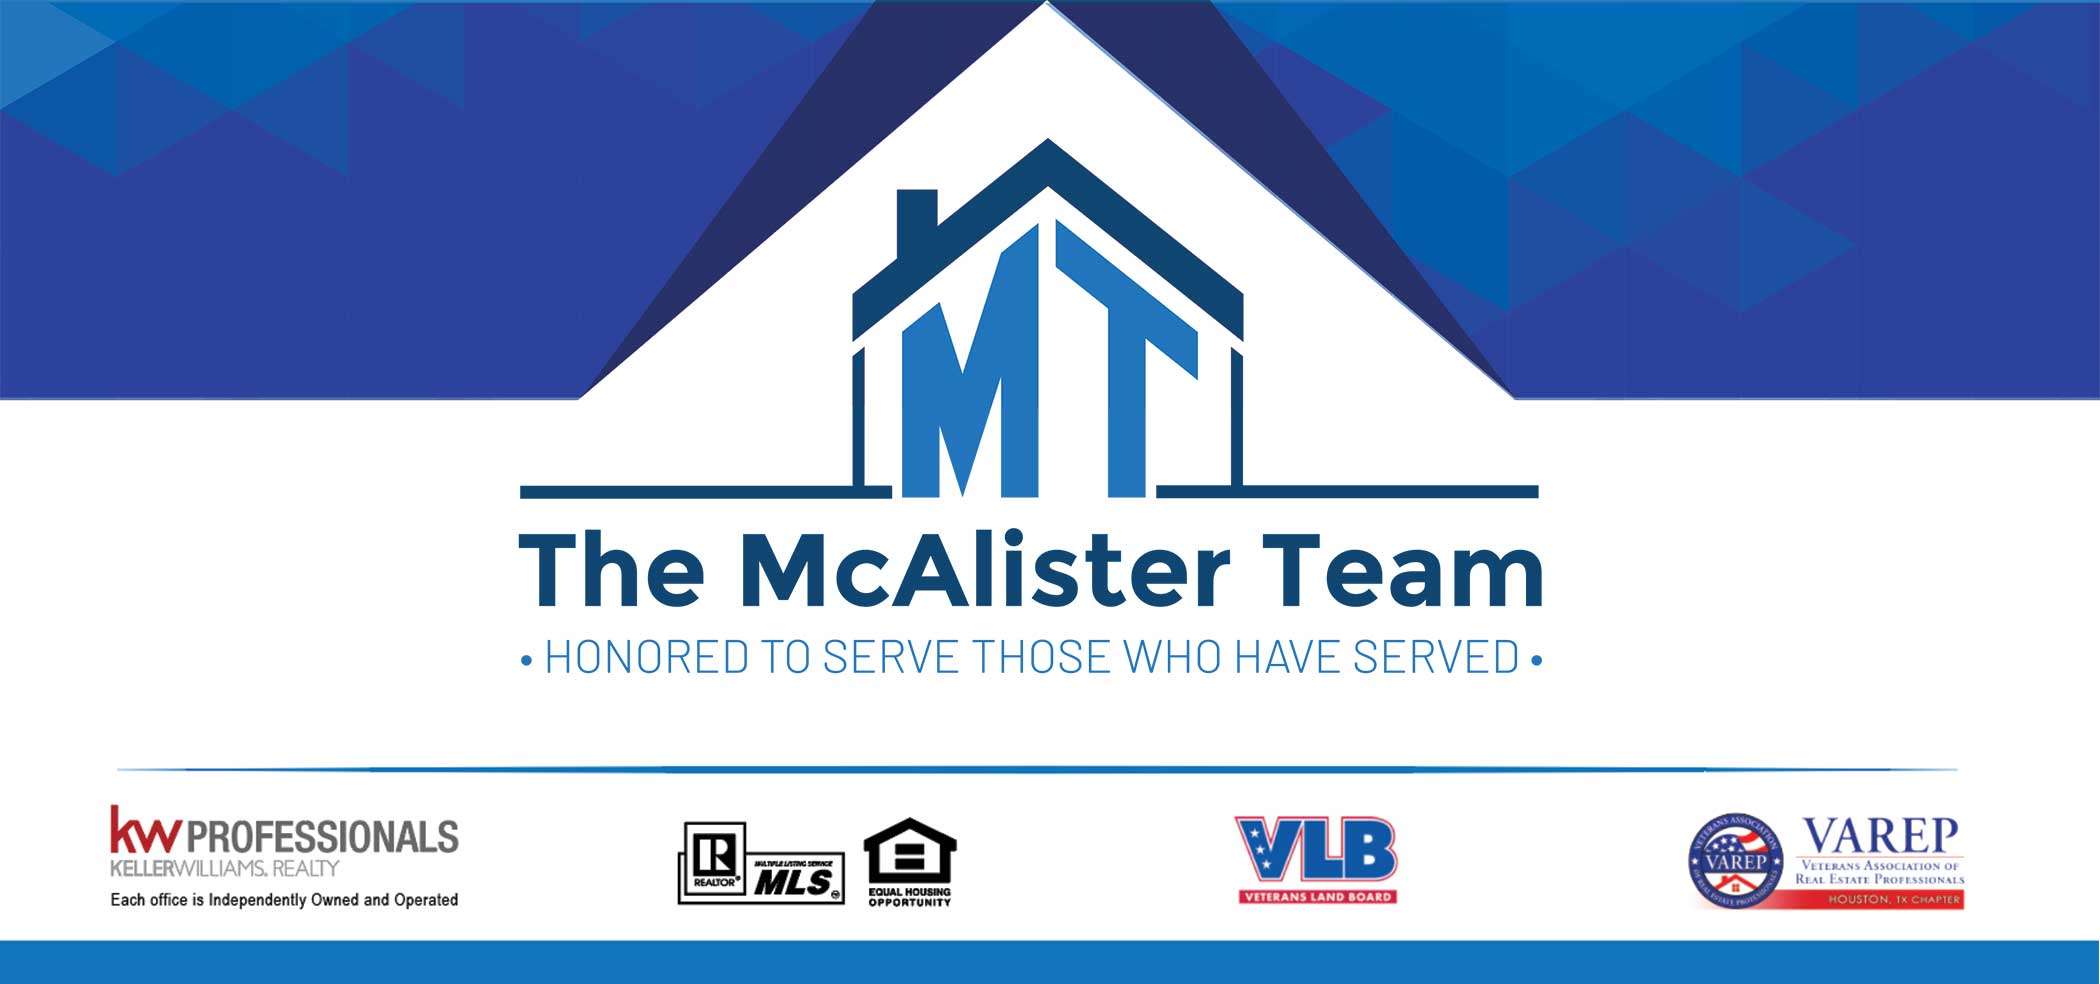 The McAlister Team Business Card